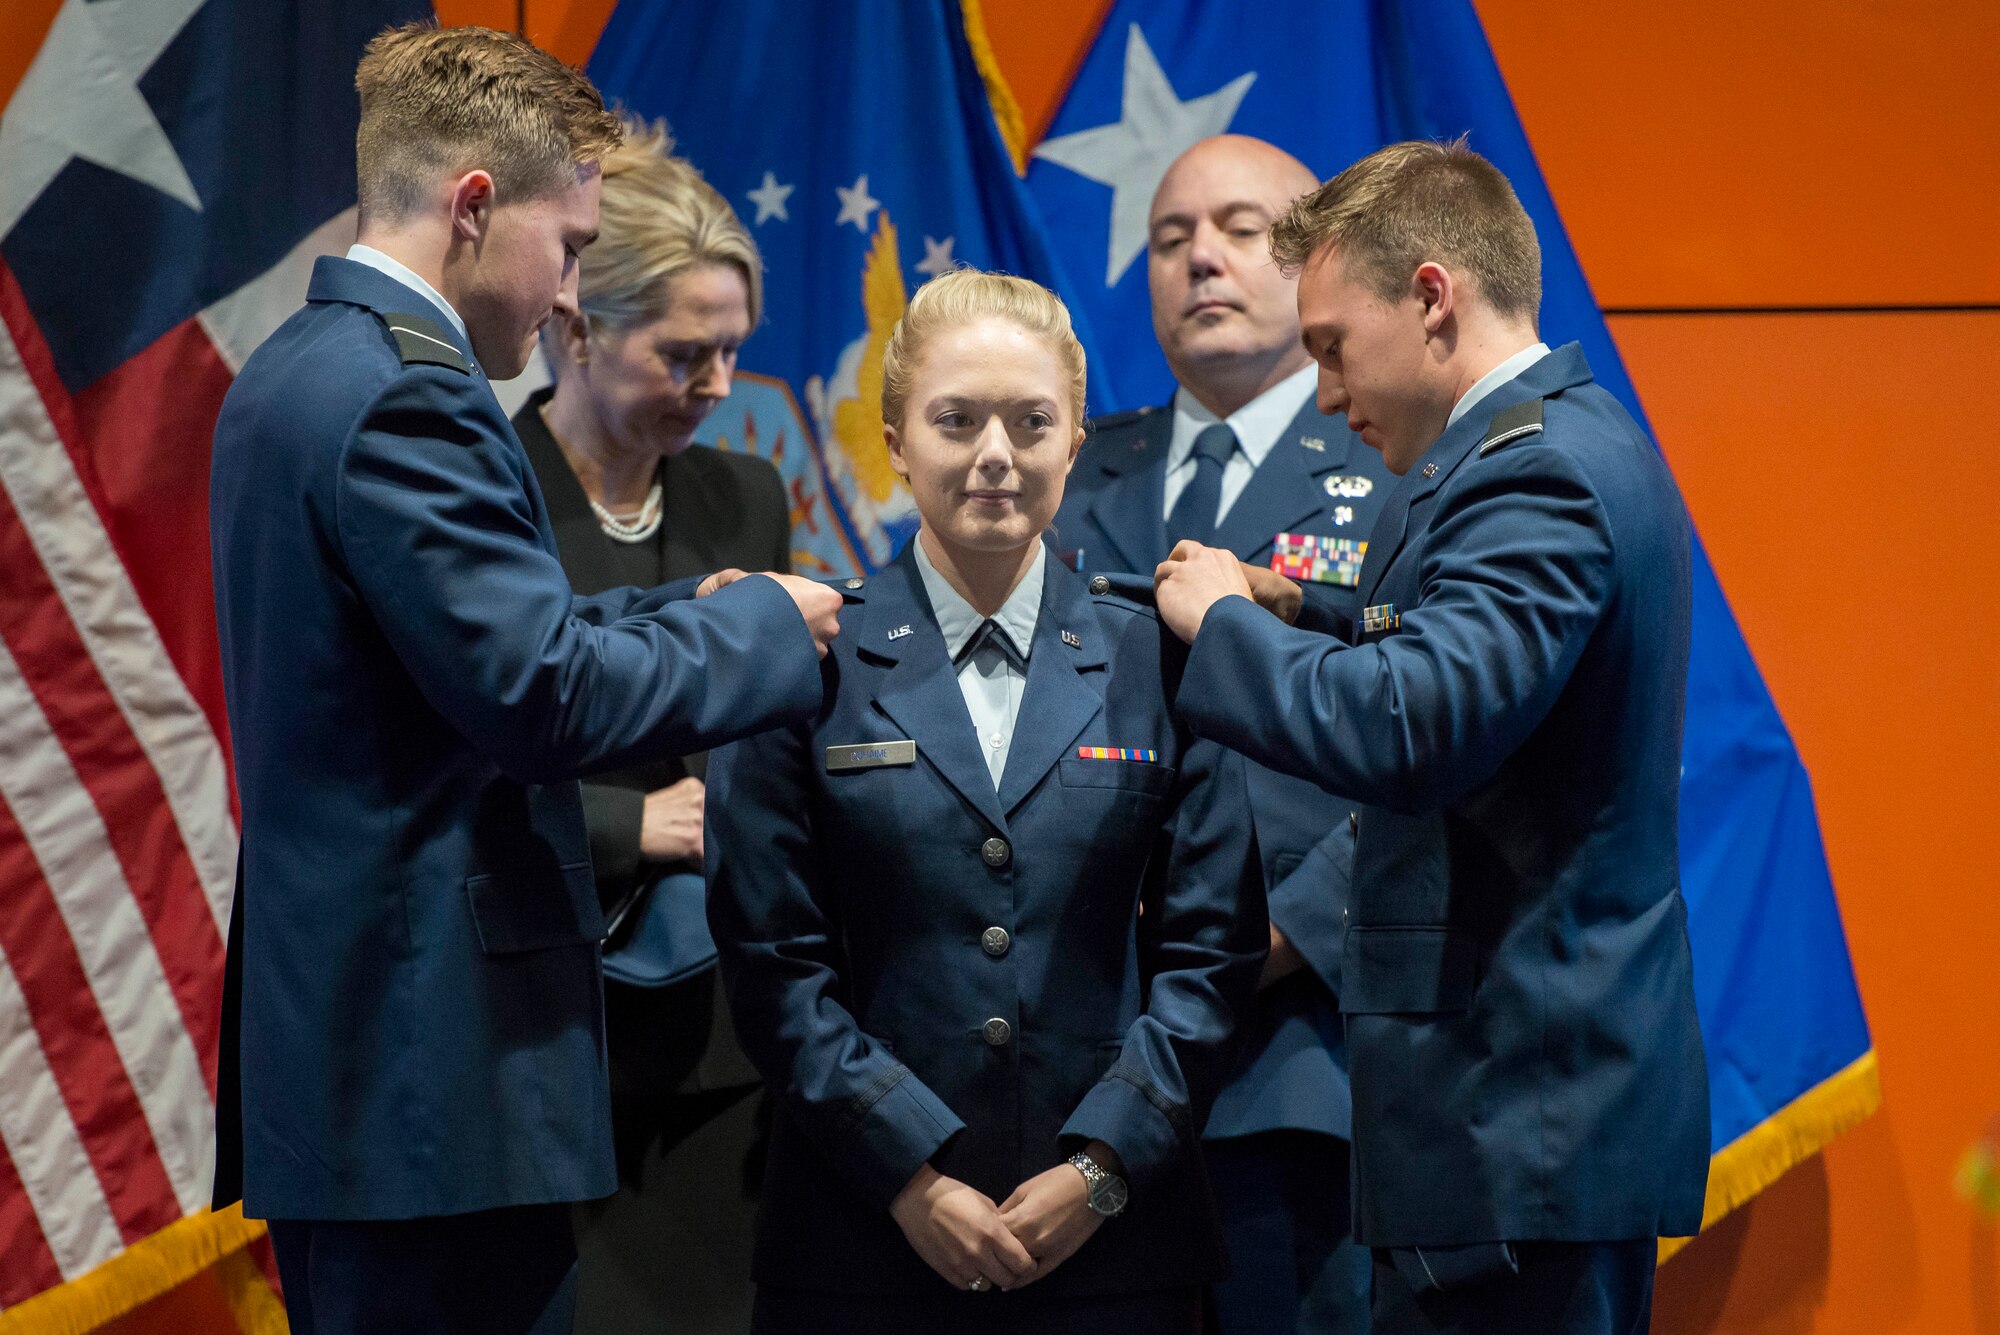 Cadet Alexandra Duhaime, Air Force Reserve Officer Training Corps Detachment 842, has her second lieutenant rank pinned on by her brothers, Brian and Michael, during her commissioning ceremony May 10, 2018, at the University of Texas San Antonio.  Air Force ROTC is one of the three primary commissioning sources for officers in the United States Air Force, the other two being the United States Air Force Academy and Air Force Officer Training School. (U.S. Air Force photo by Sean M. Worrell)